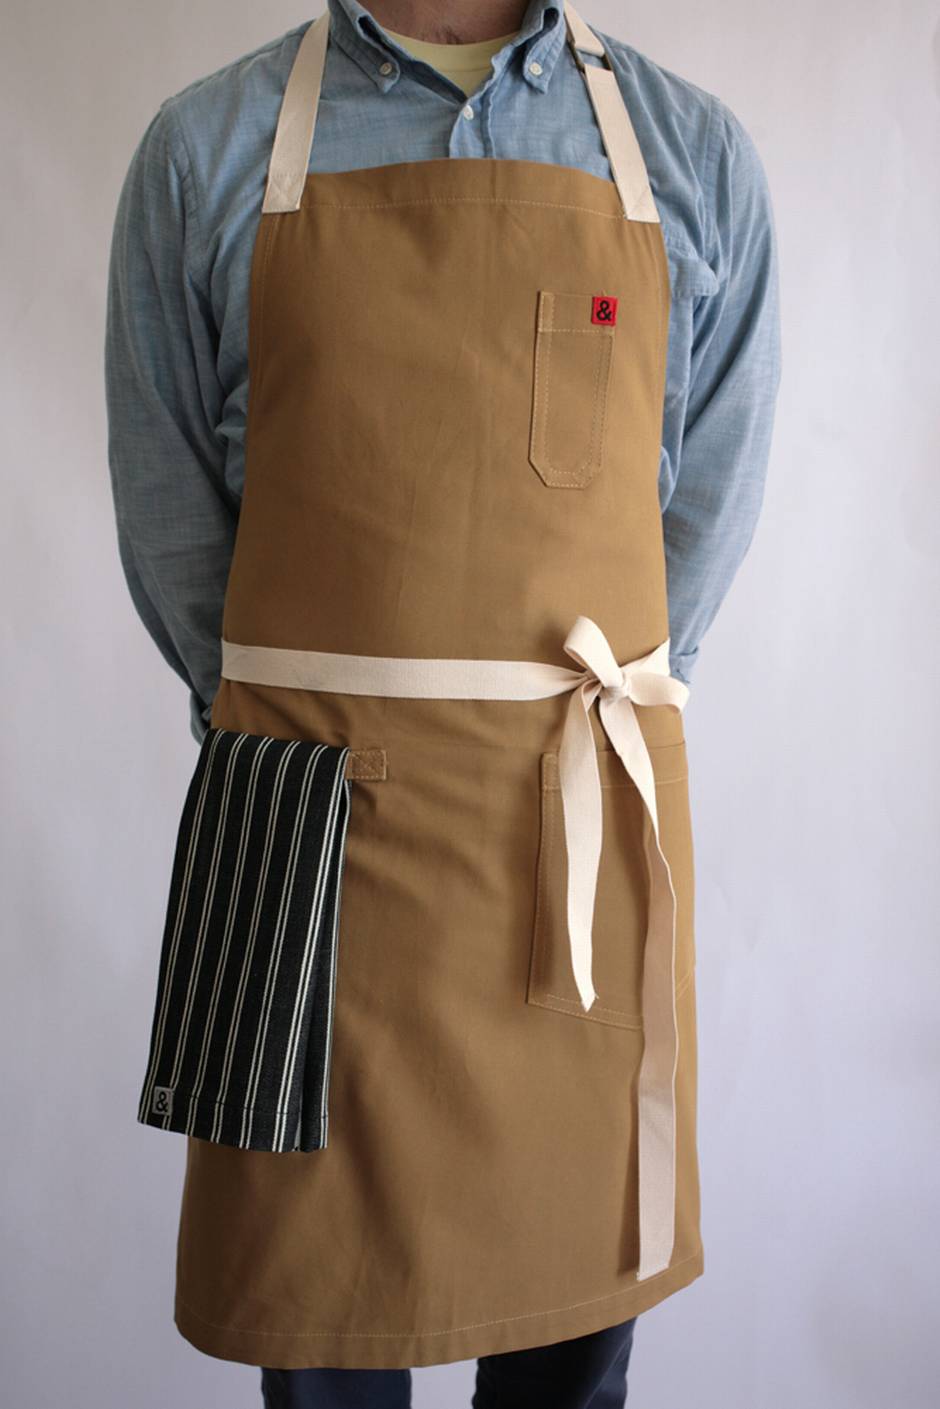 Made of American canvas, this apron is a step up from whatever "Kiss t...